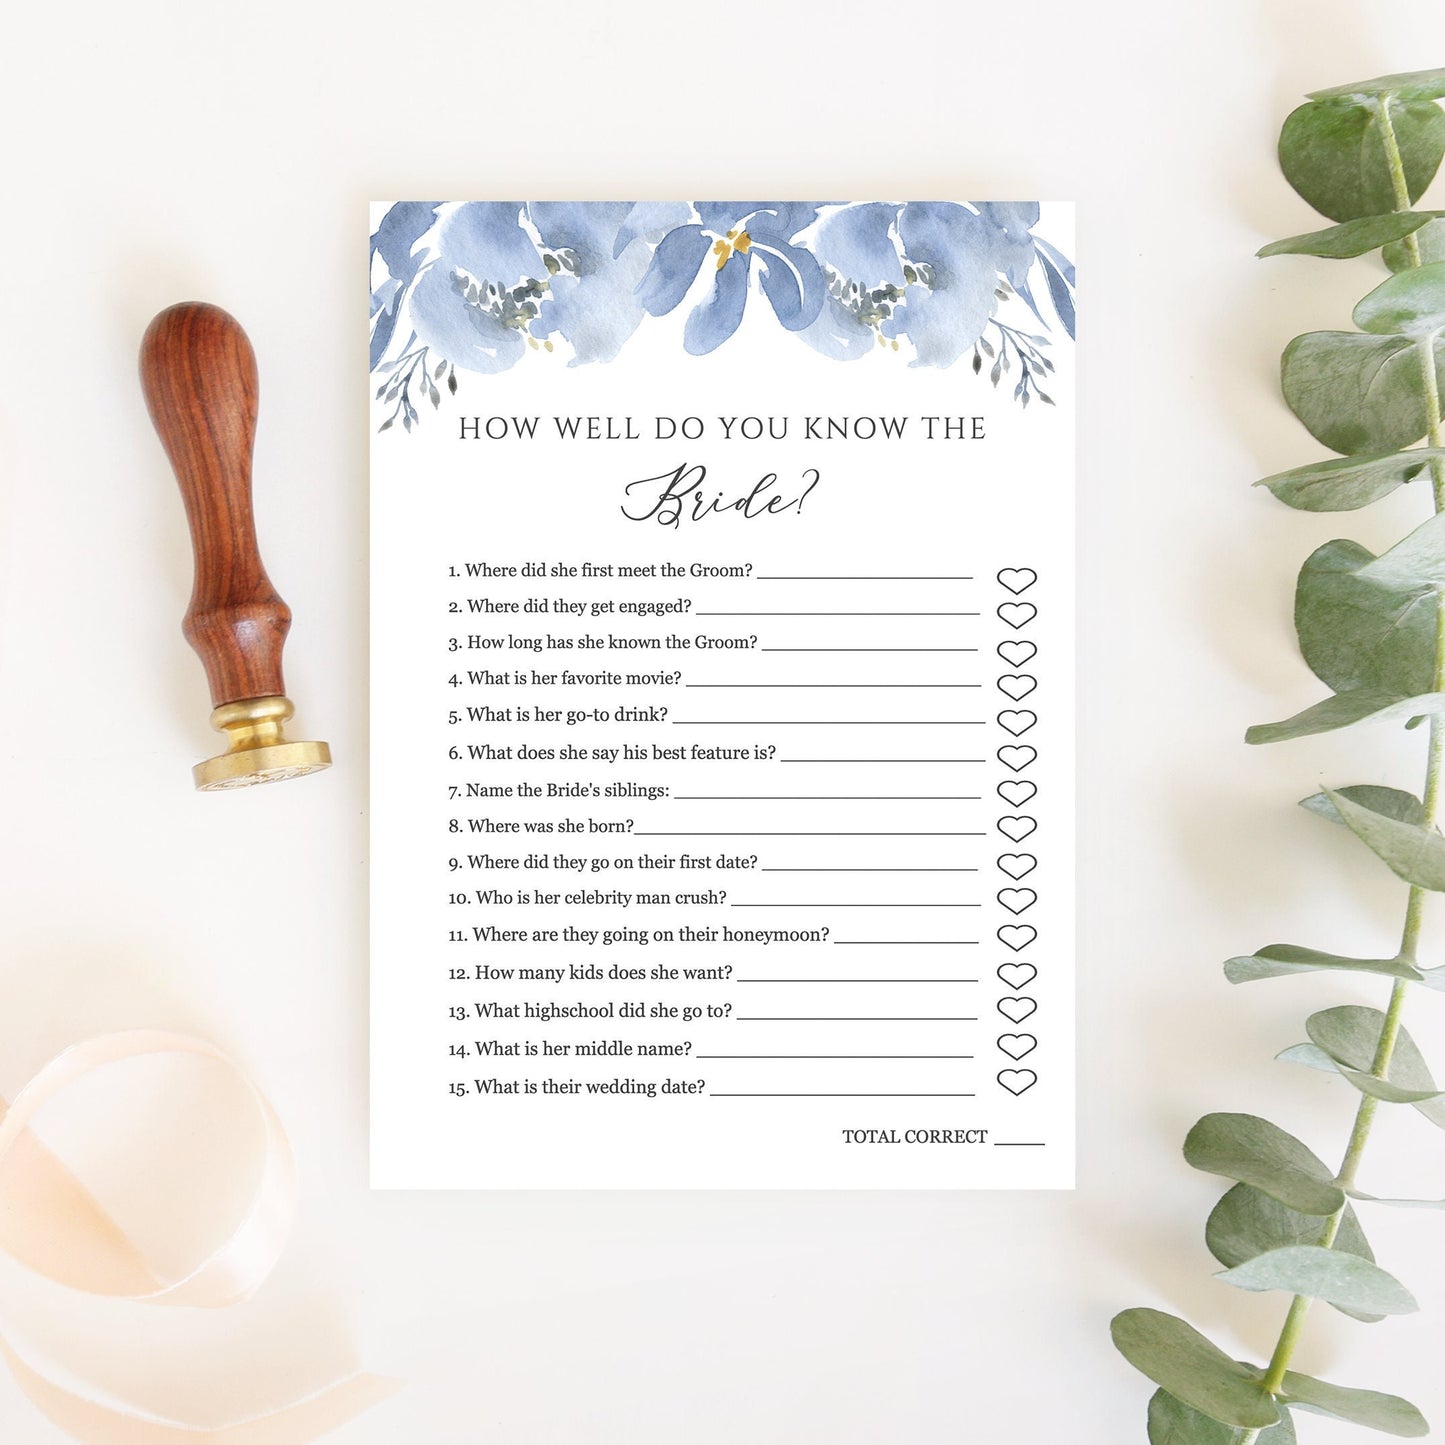 Editable How Well Do You Know the Bride Bridal Shower Games Virtual Dusty Blue Floral Template